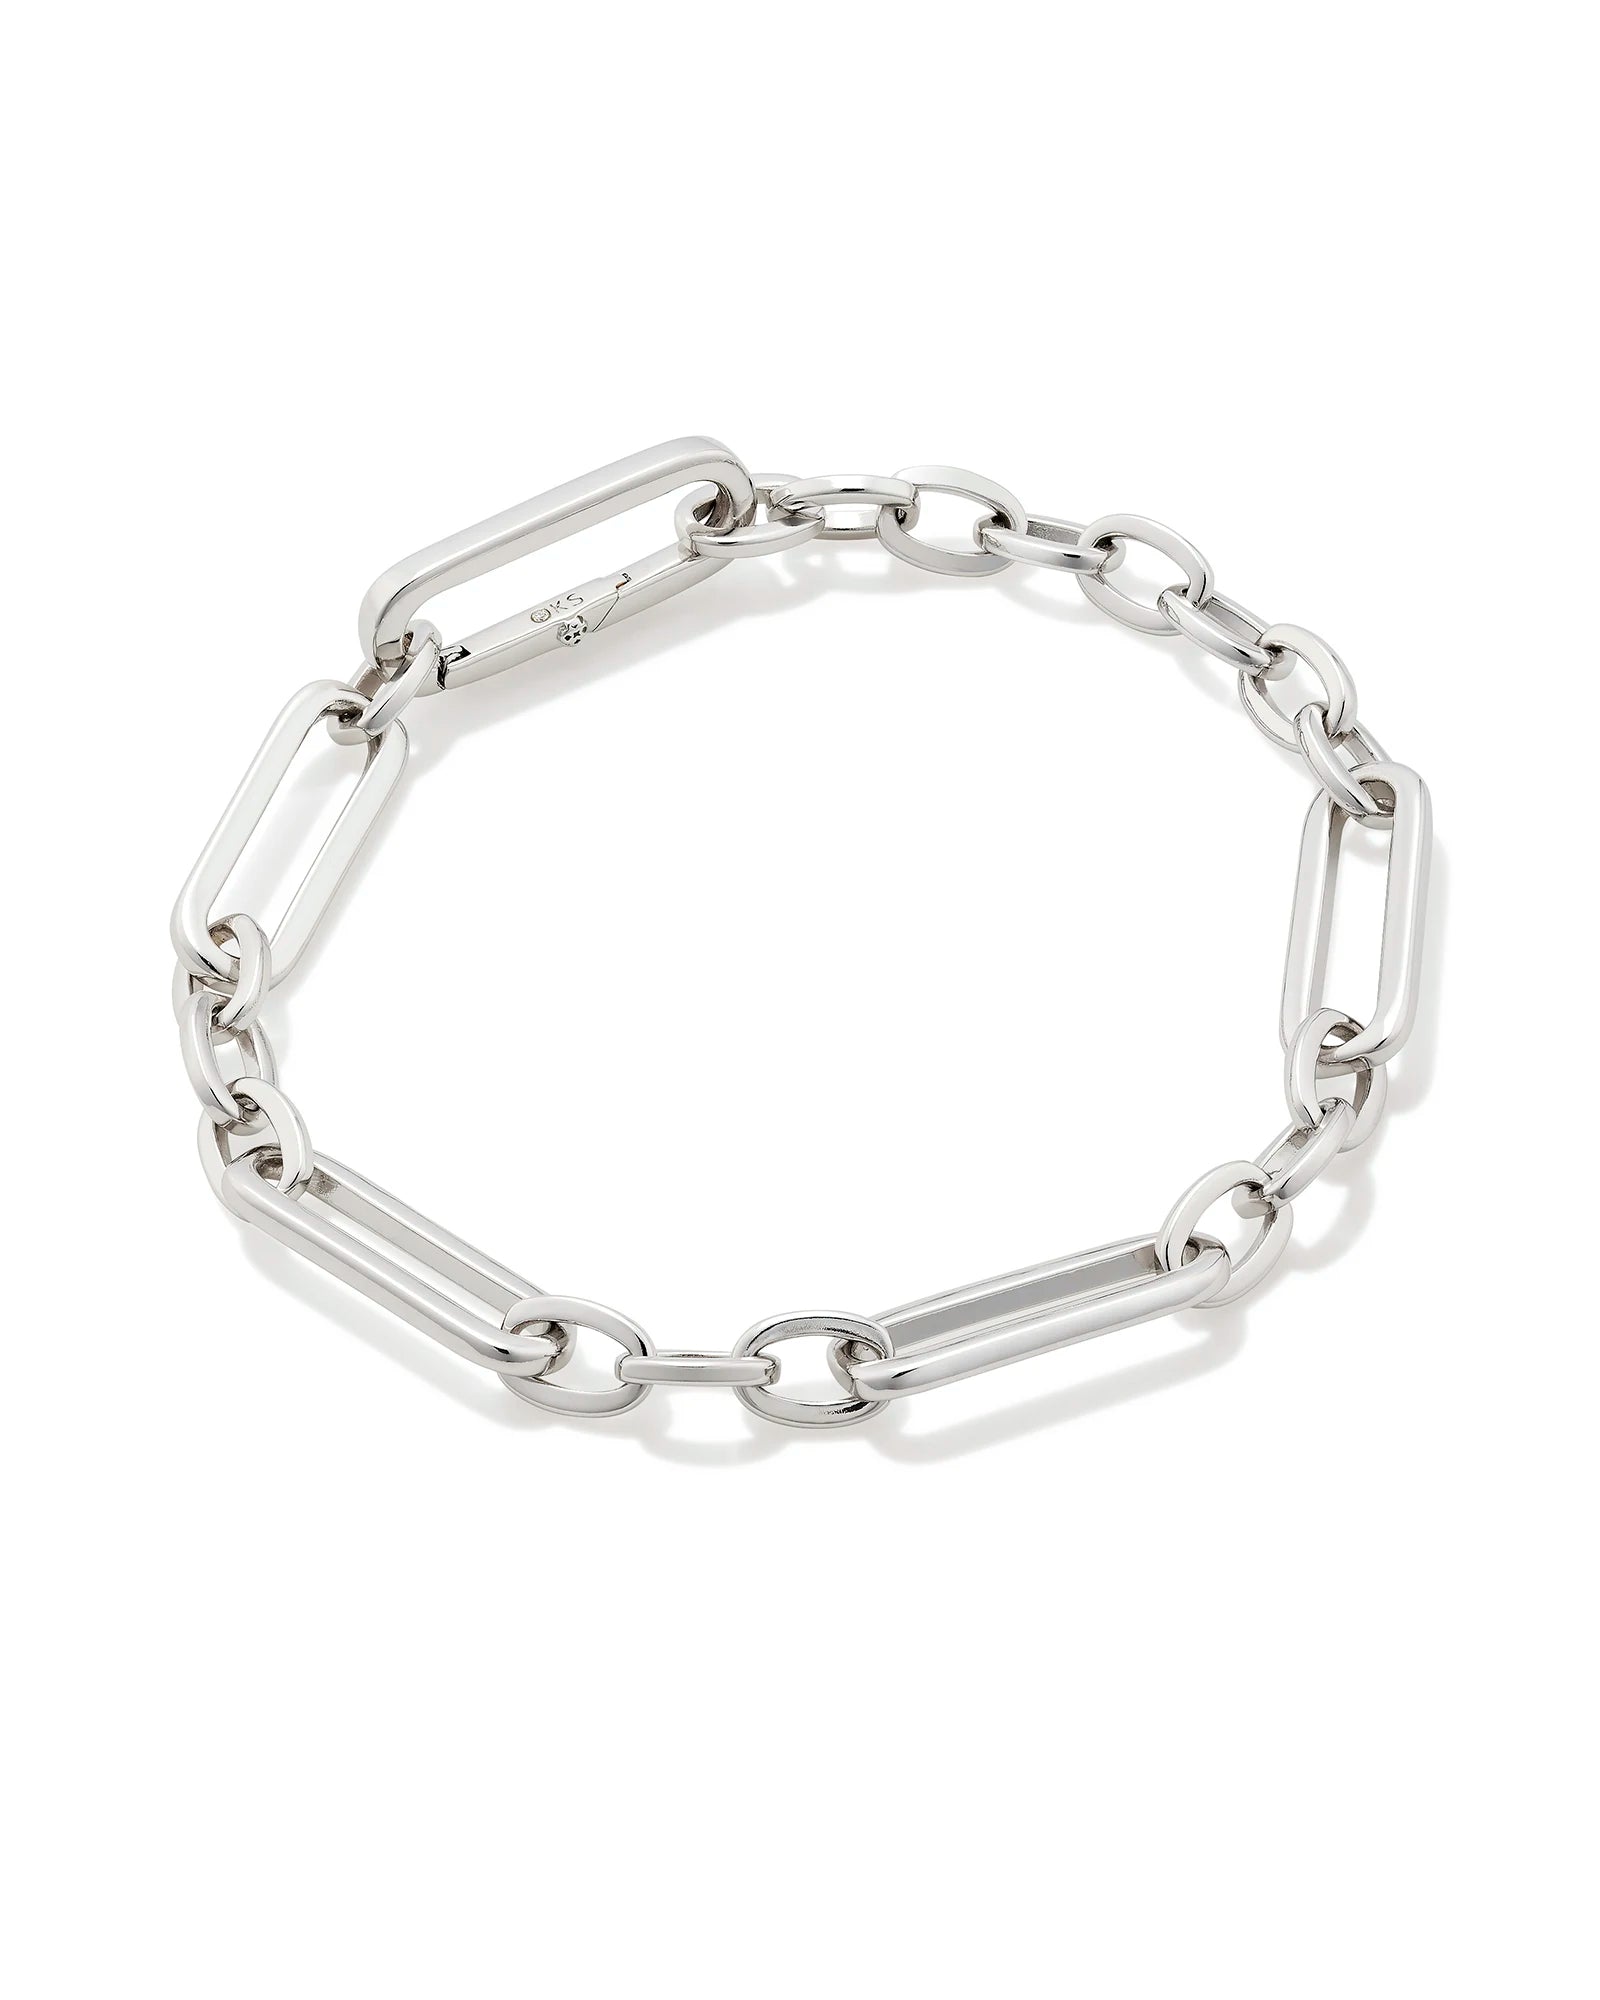 Kendra Scott Heather Link And Chain Bracelet in Silver